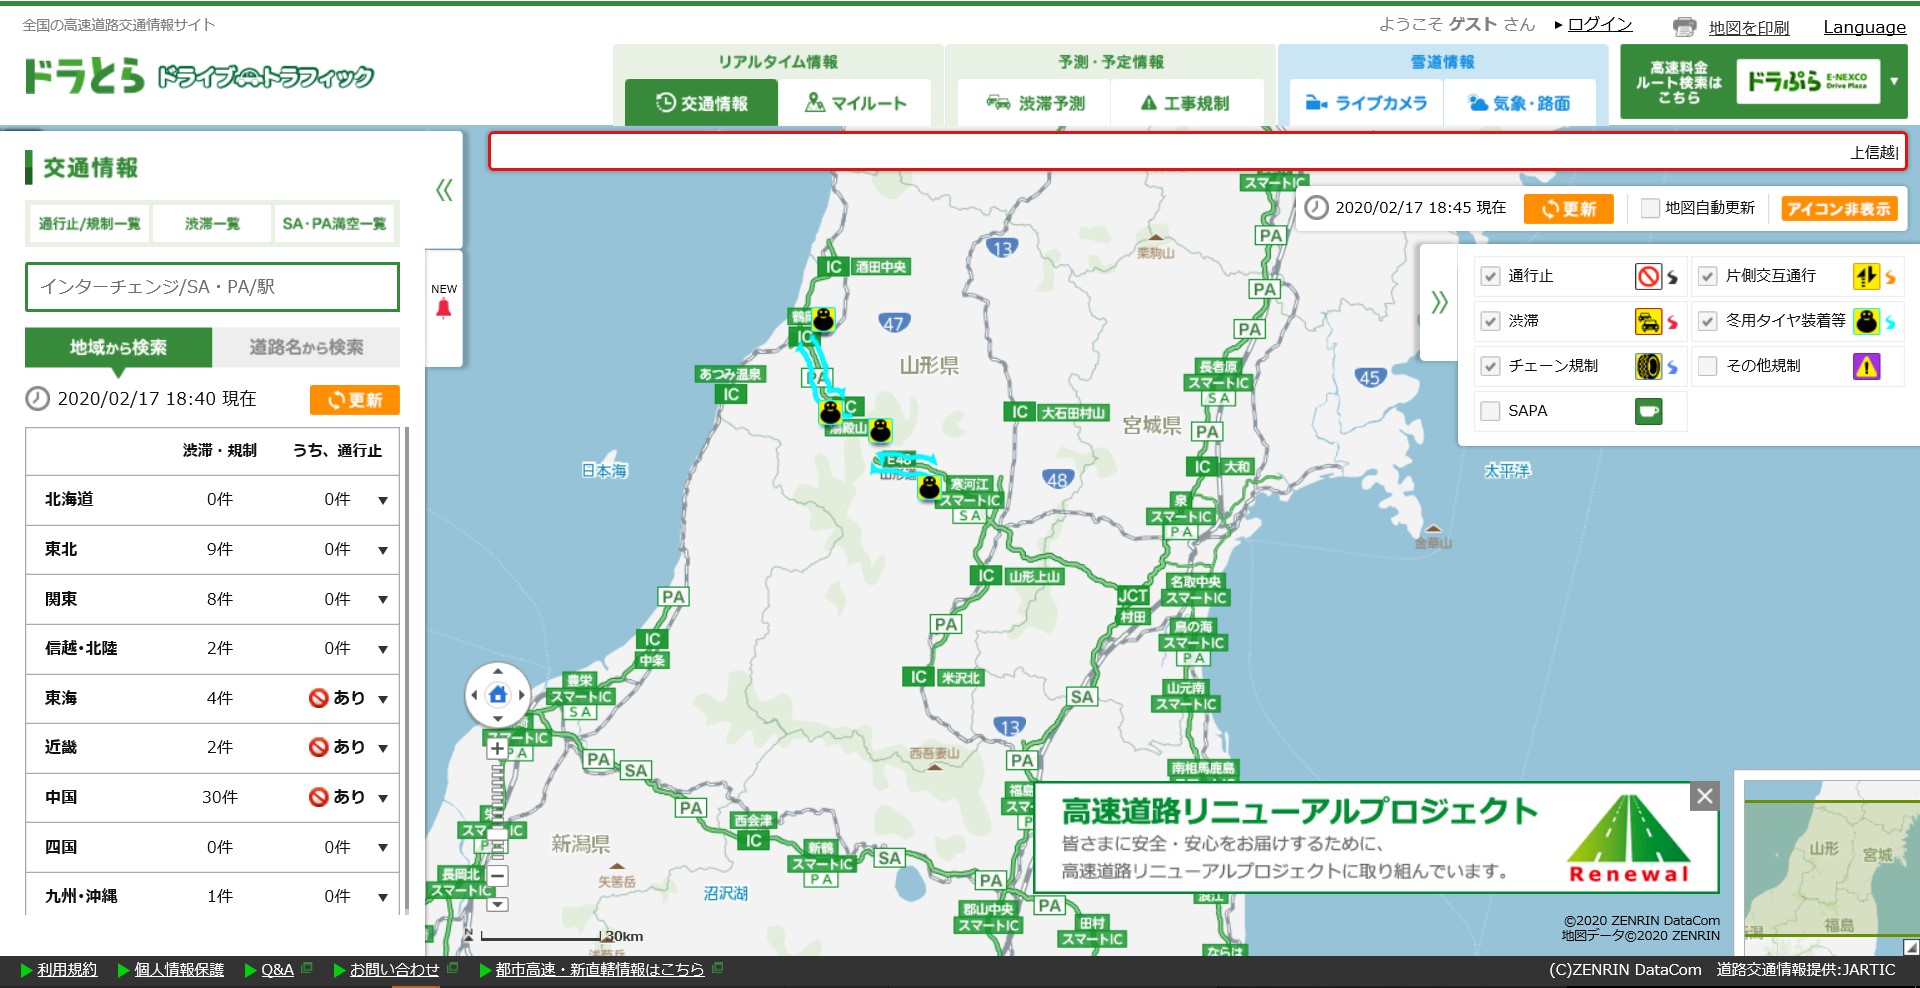 ◆ Image of real-time traffic information display example